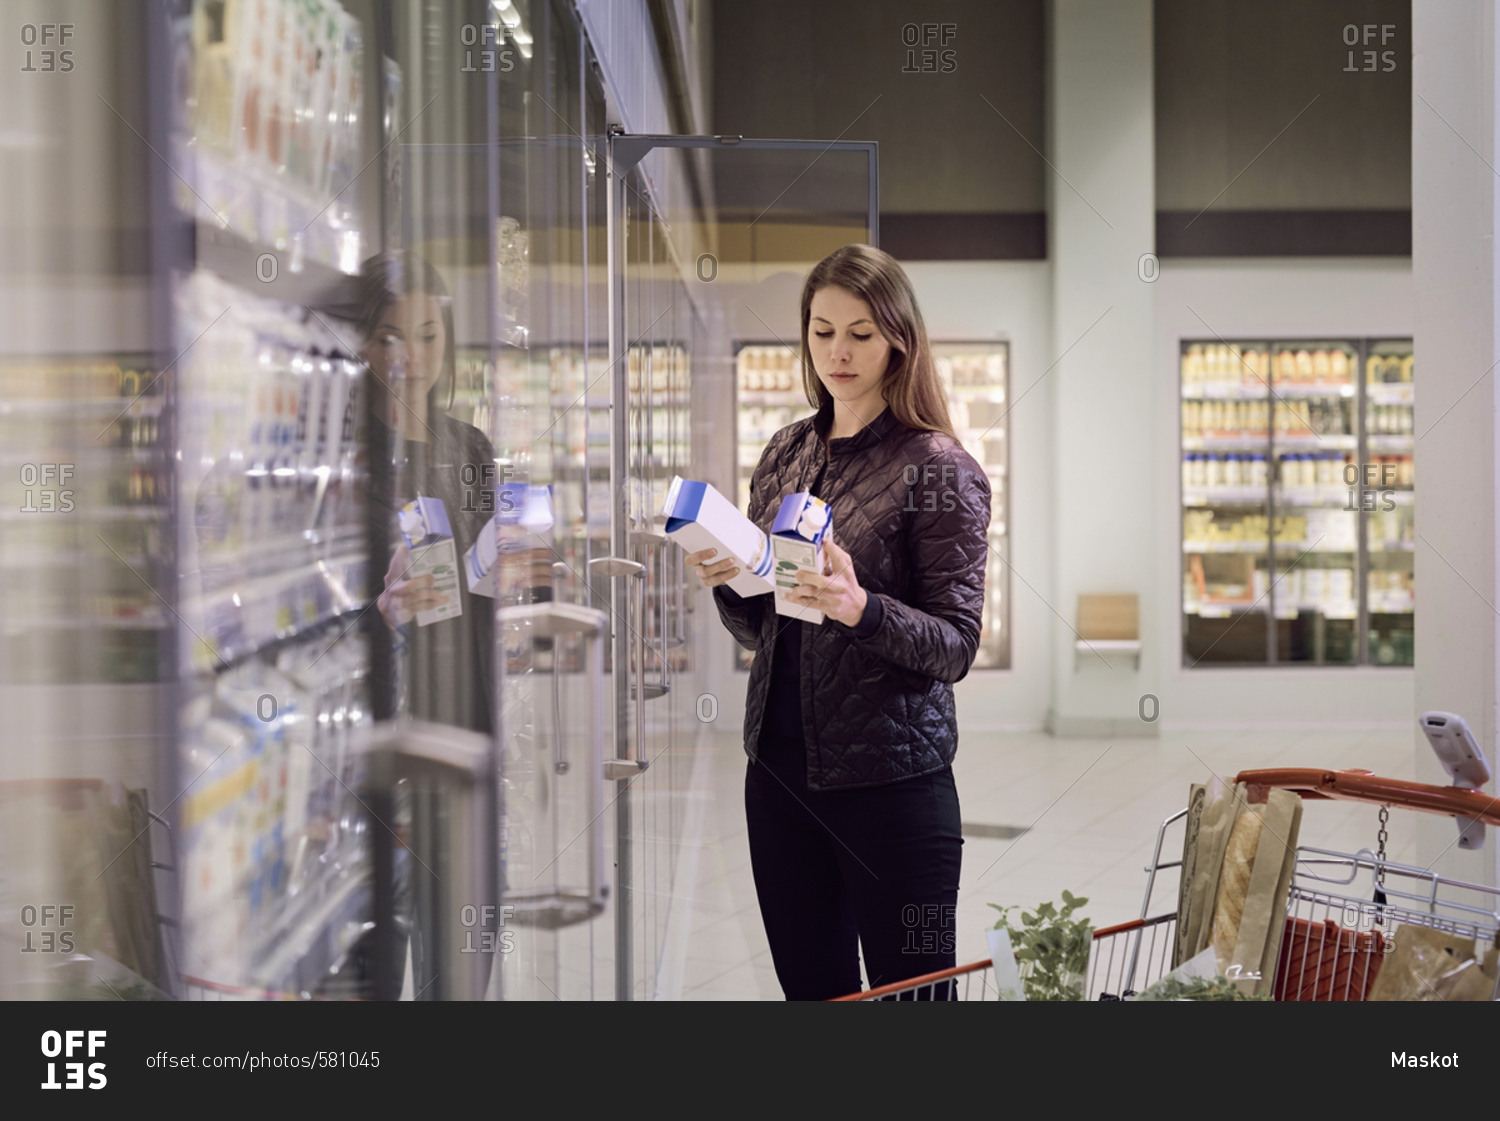 Woman holding juice boxes at refrigerated section in supermarket